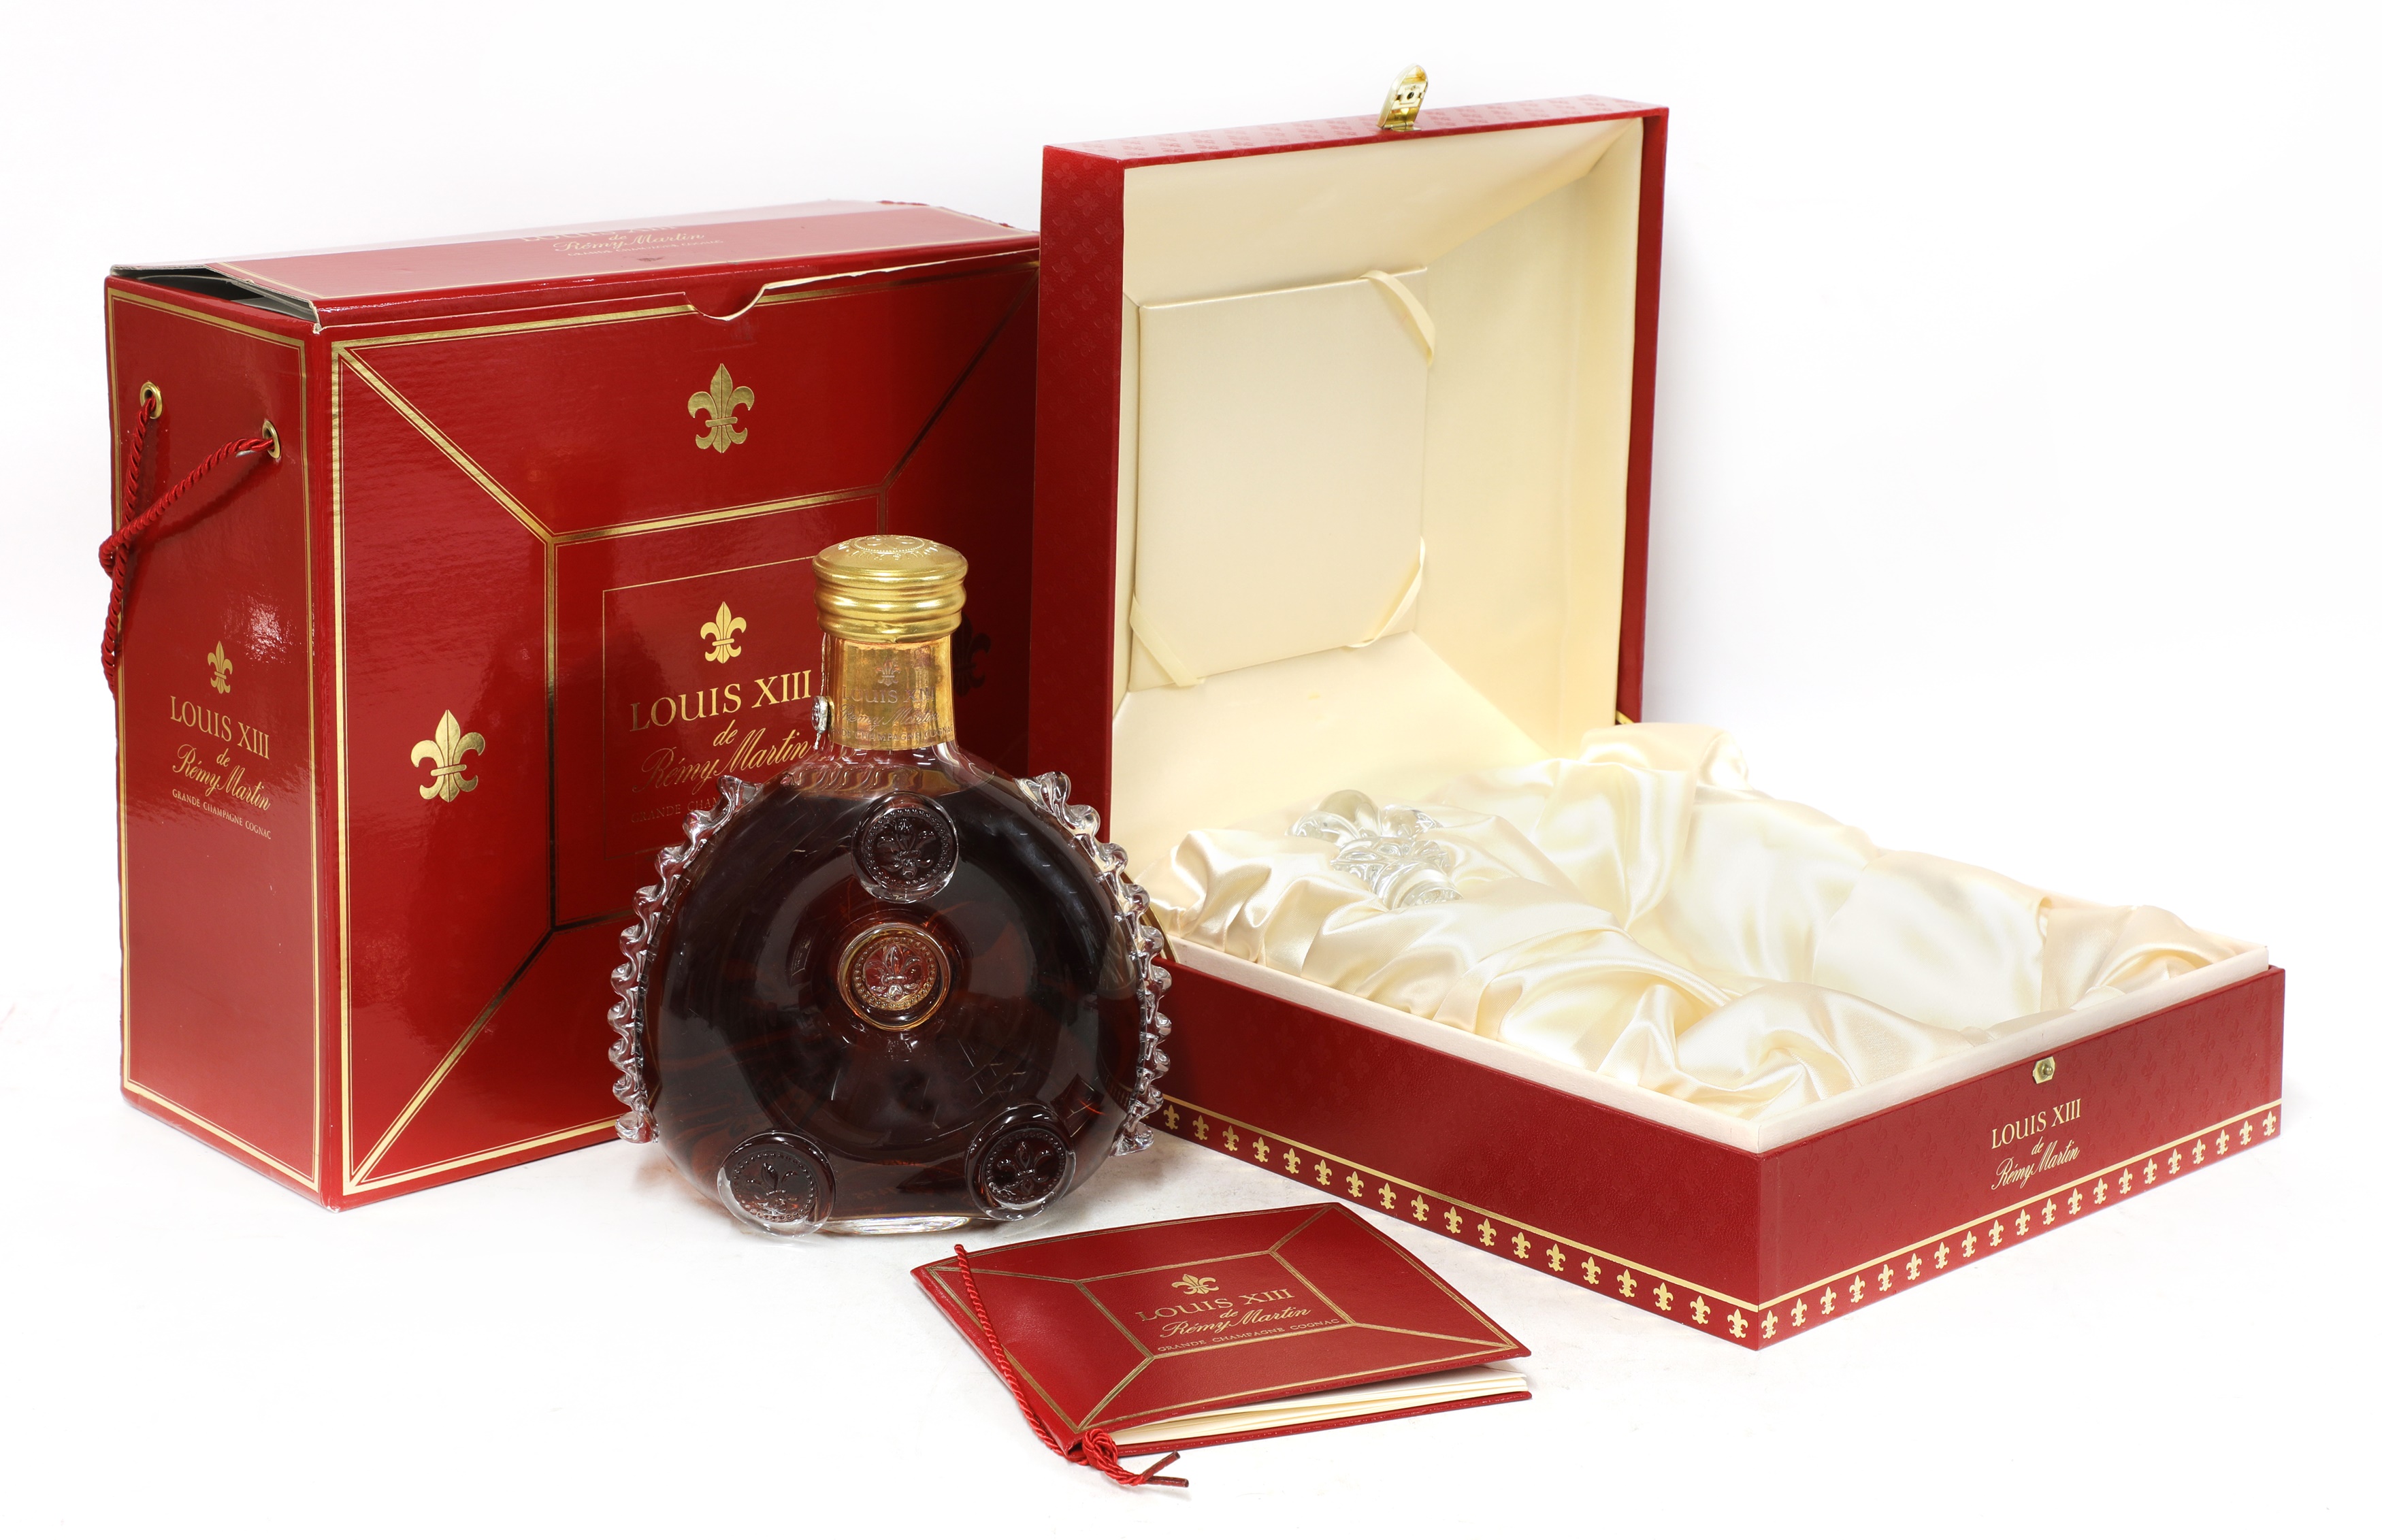 Lot - Baccarat Louis XIII Remy Martin Decanter